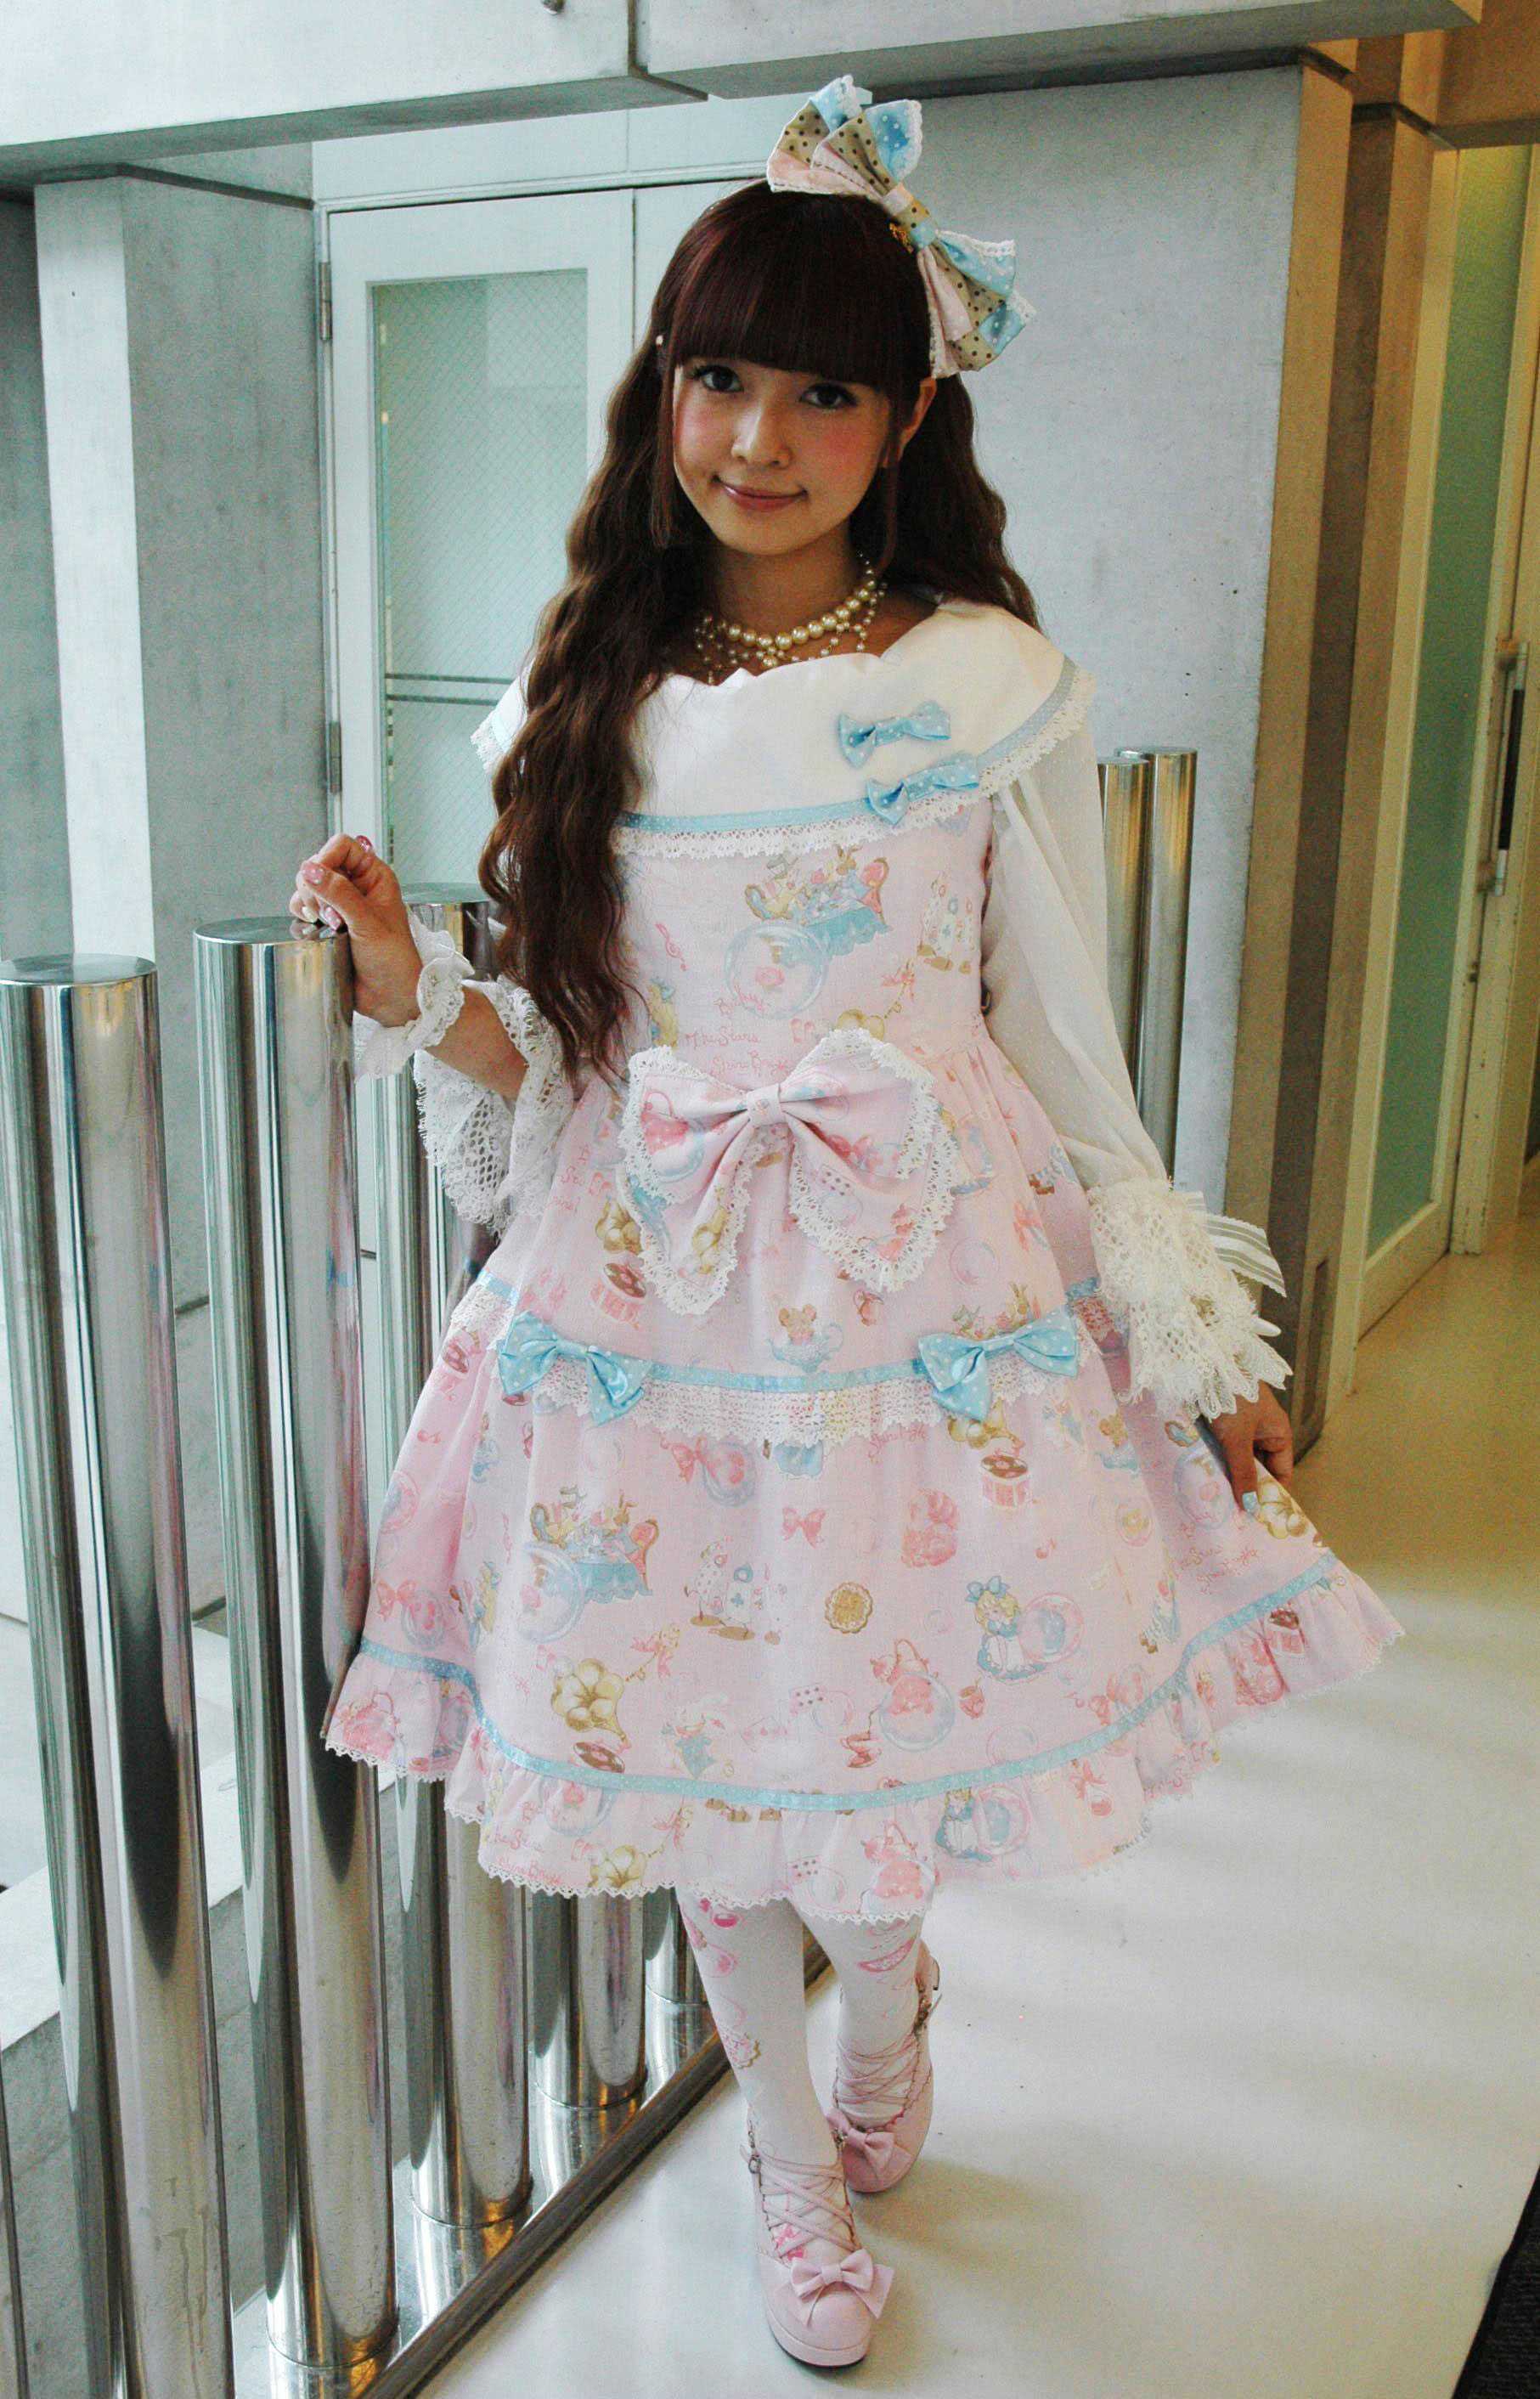 Association formed to pitch 'Lolita fashion' to the world | The Japan Times